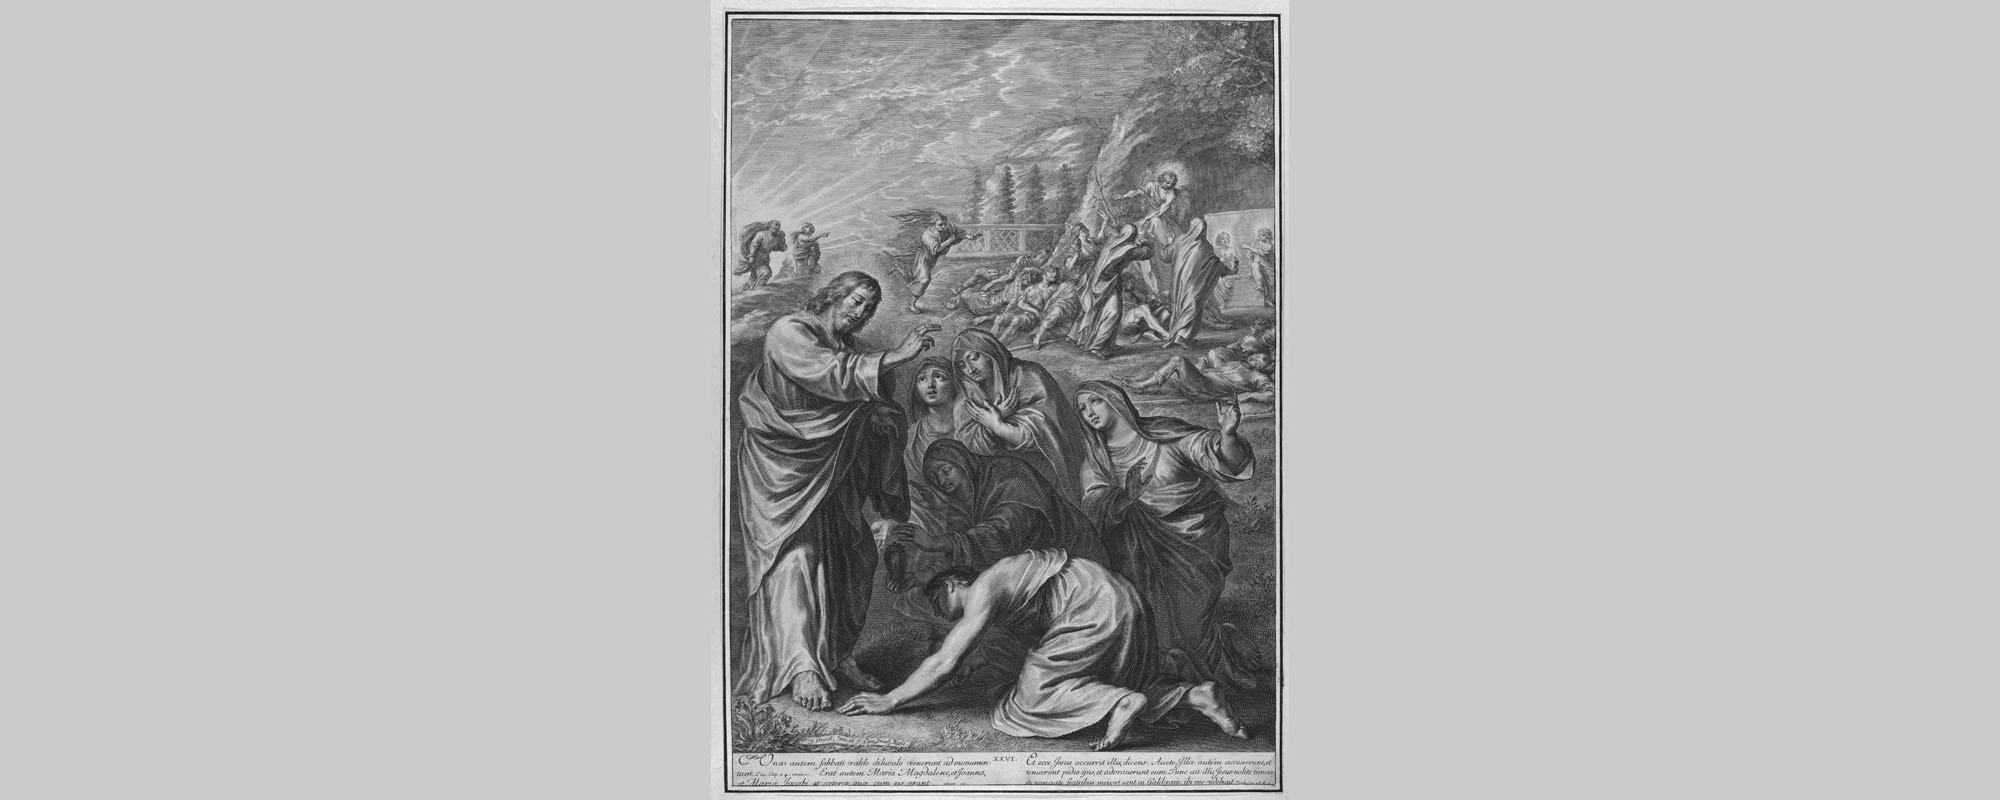 The Holy Women at Christ's Tomb, from The Passion of Christ, plate 20, by Gregoire Huret (1606-1670).